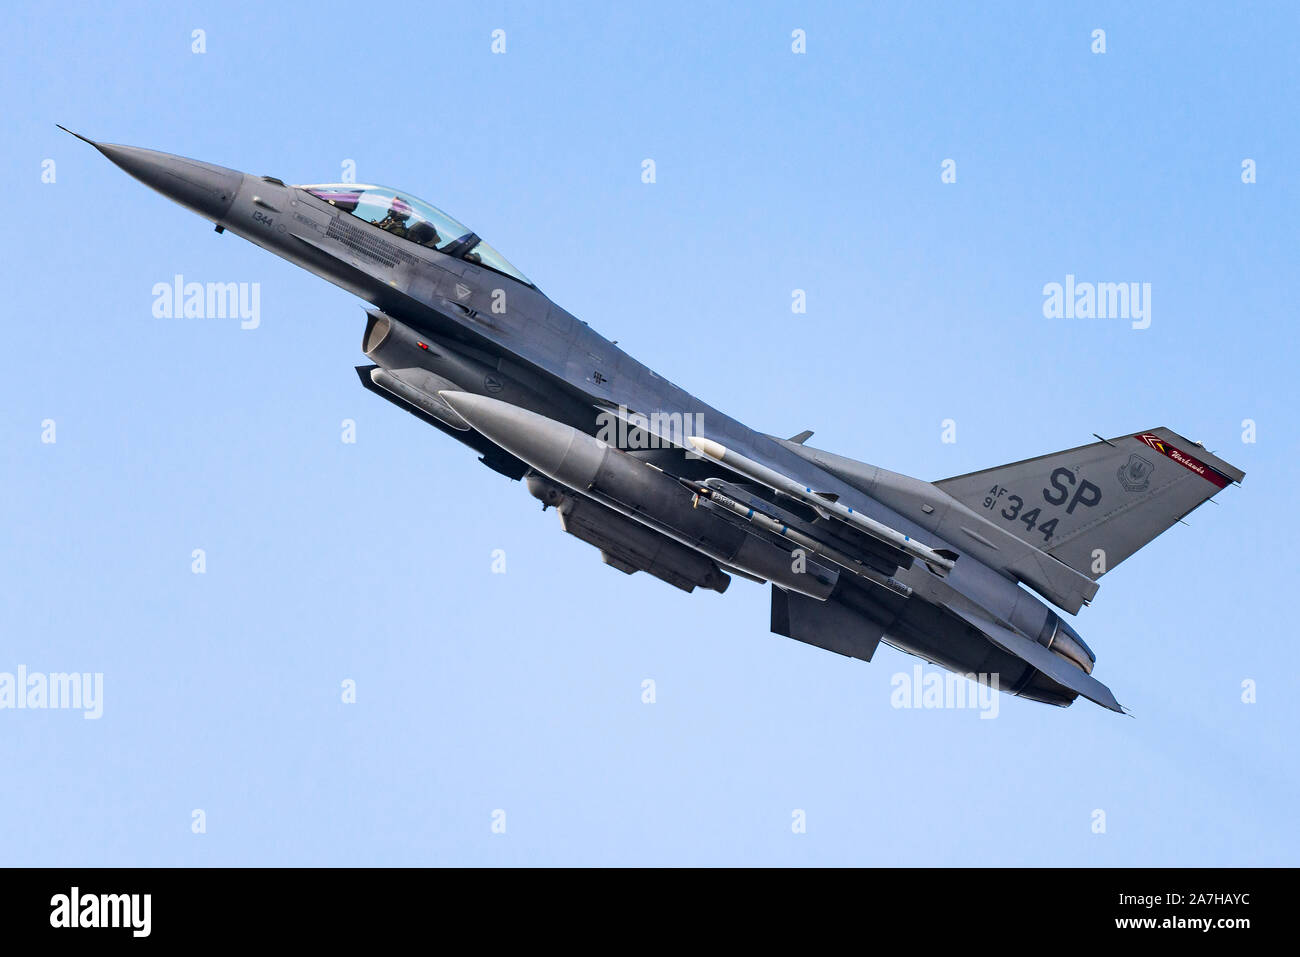 A F-16 Fighting Falcon fighter jet from the 480th Fighter Squadron at the Spangdahlem Air Base in Germany. Stock Photo